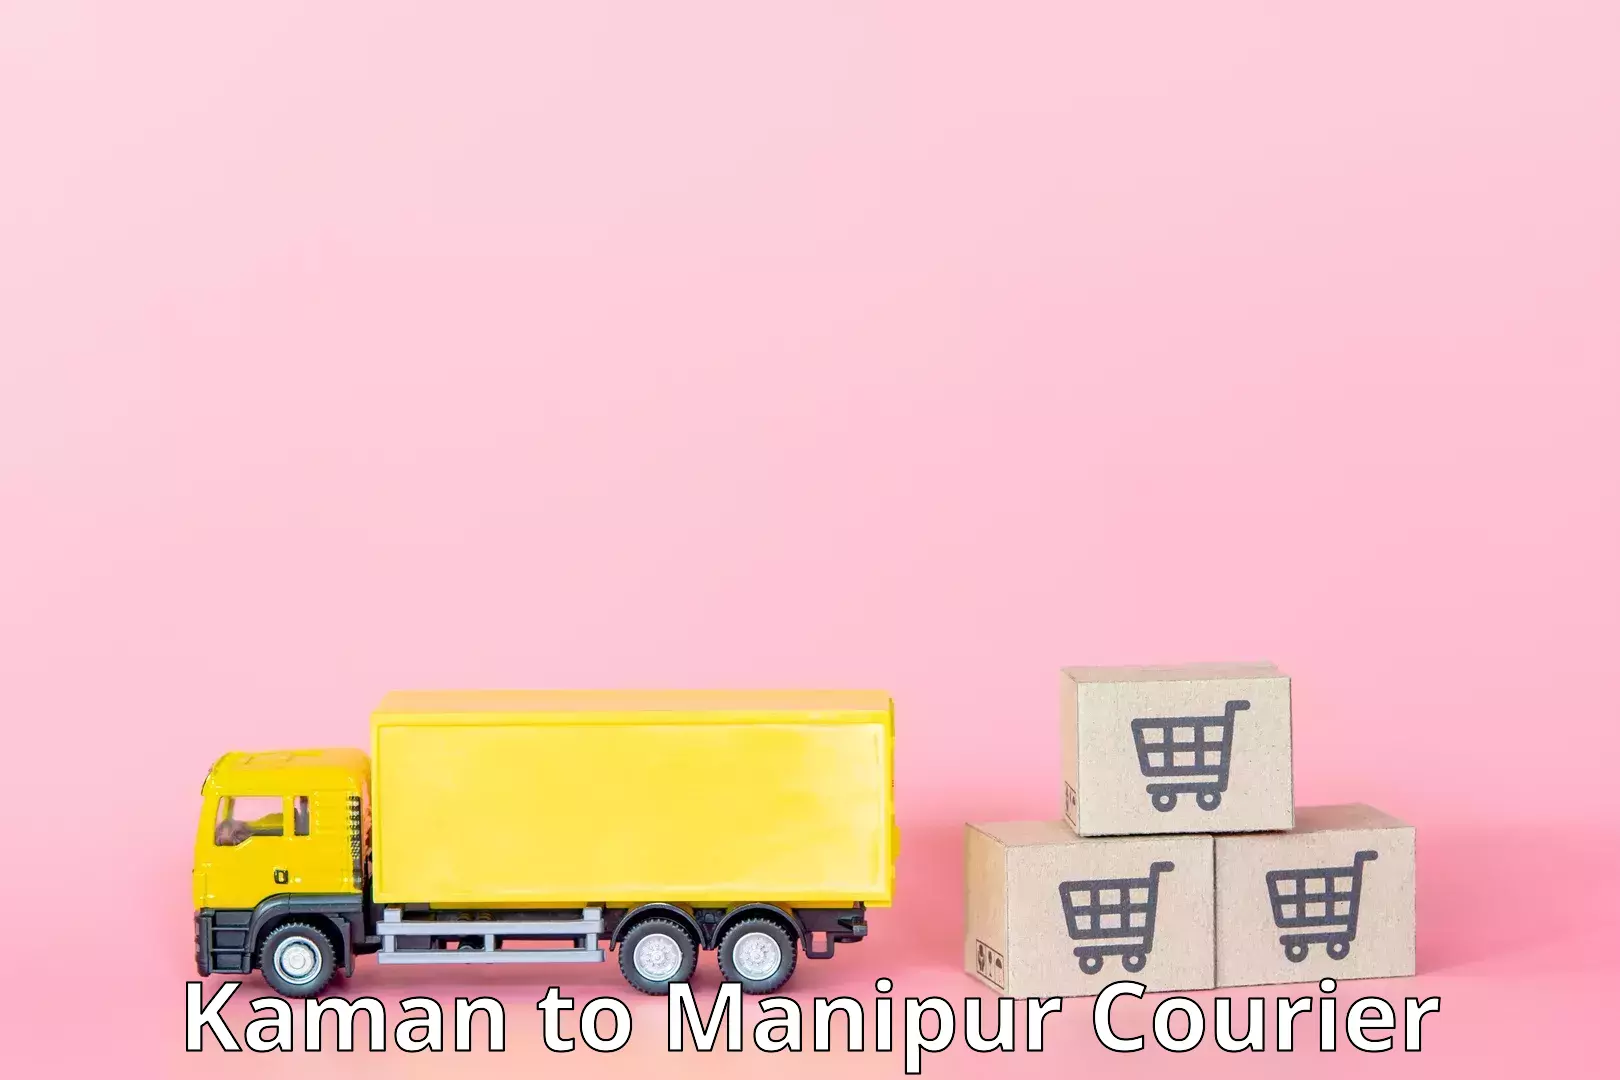 State-of-the-art courier technology in Kaman to Kanti